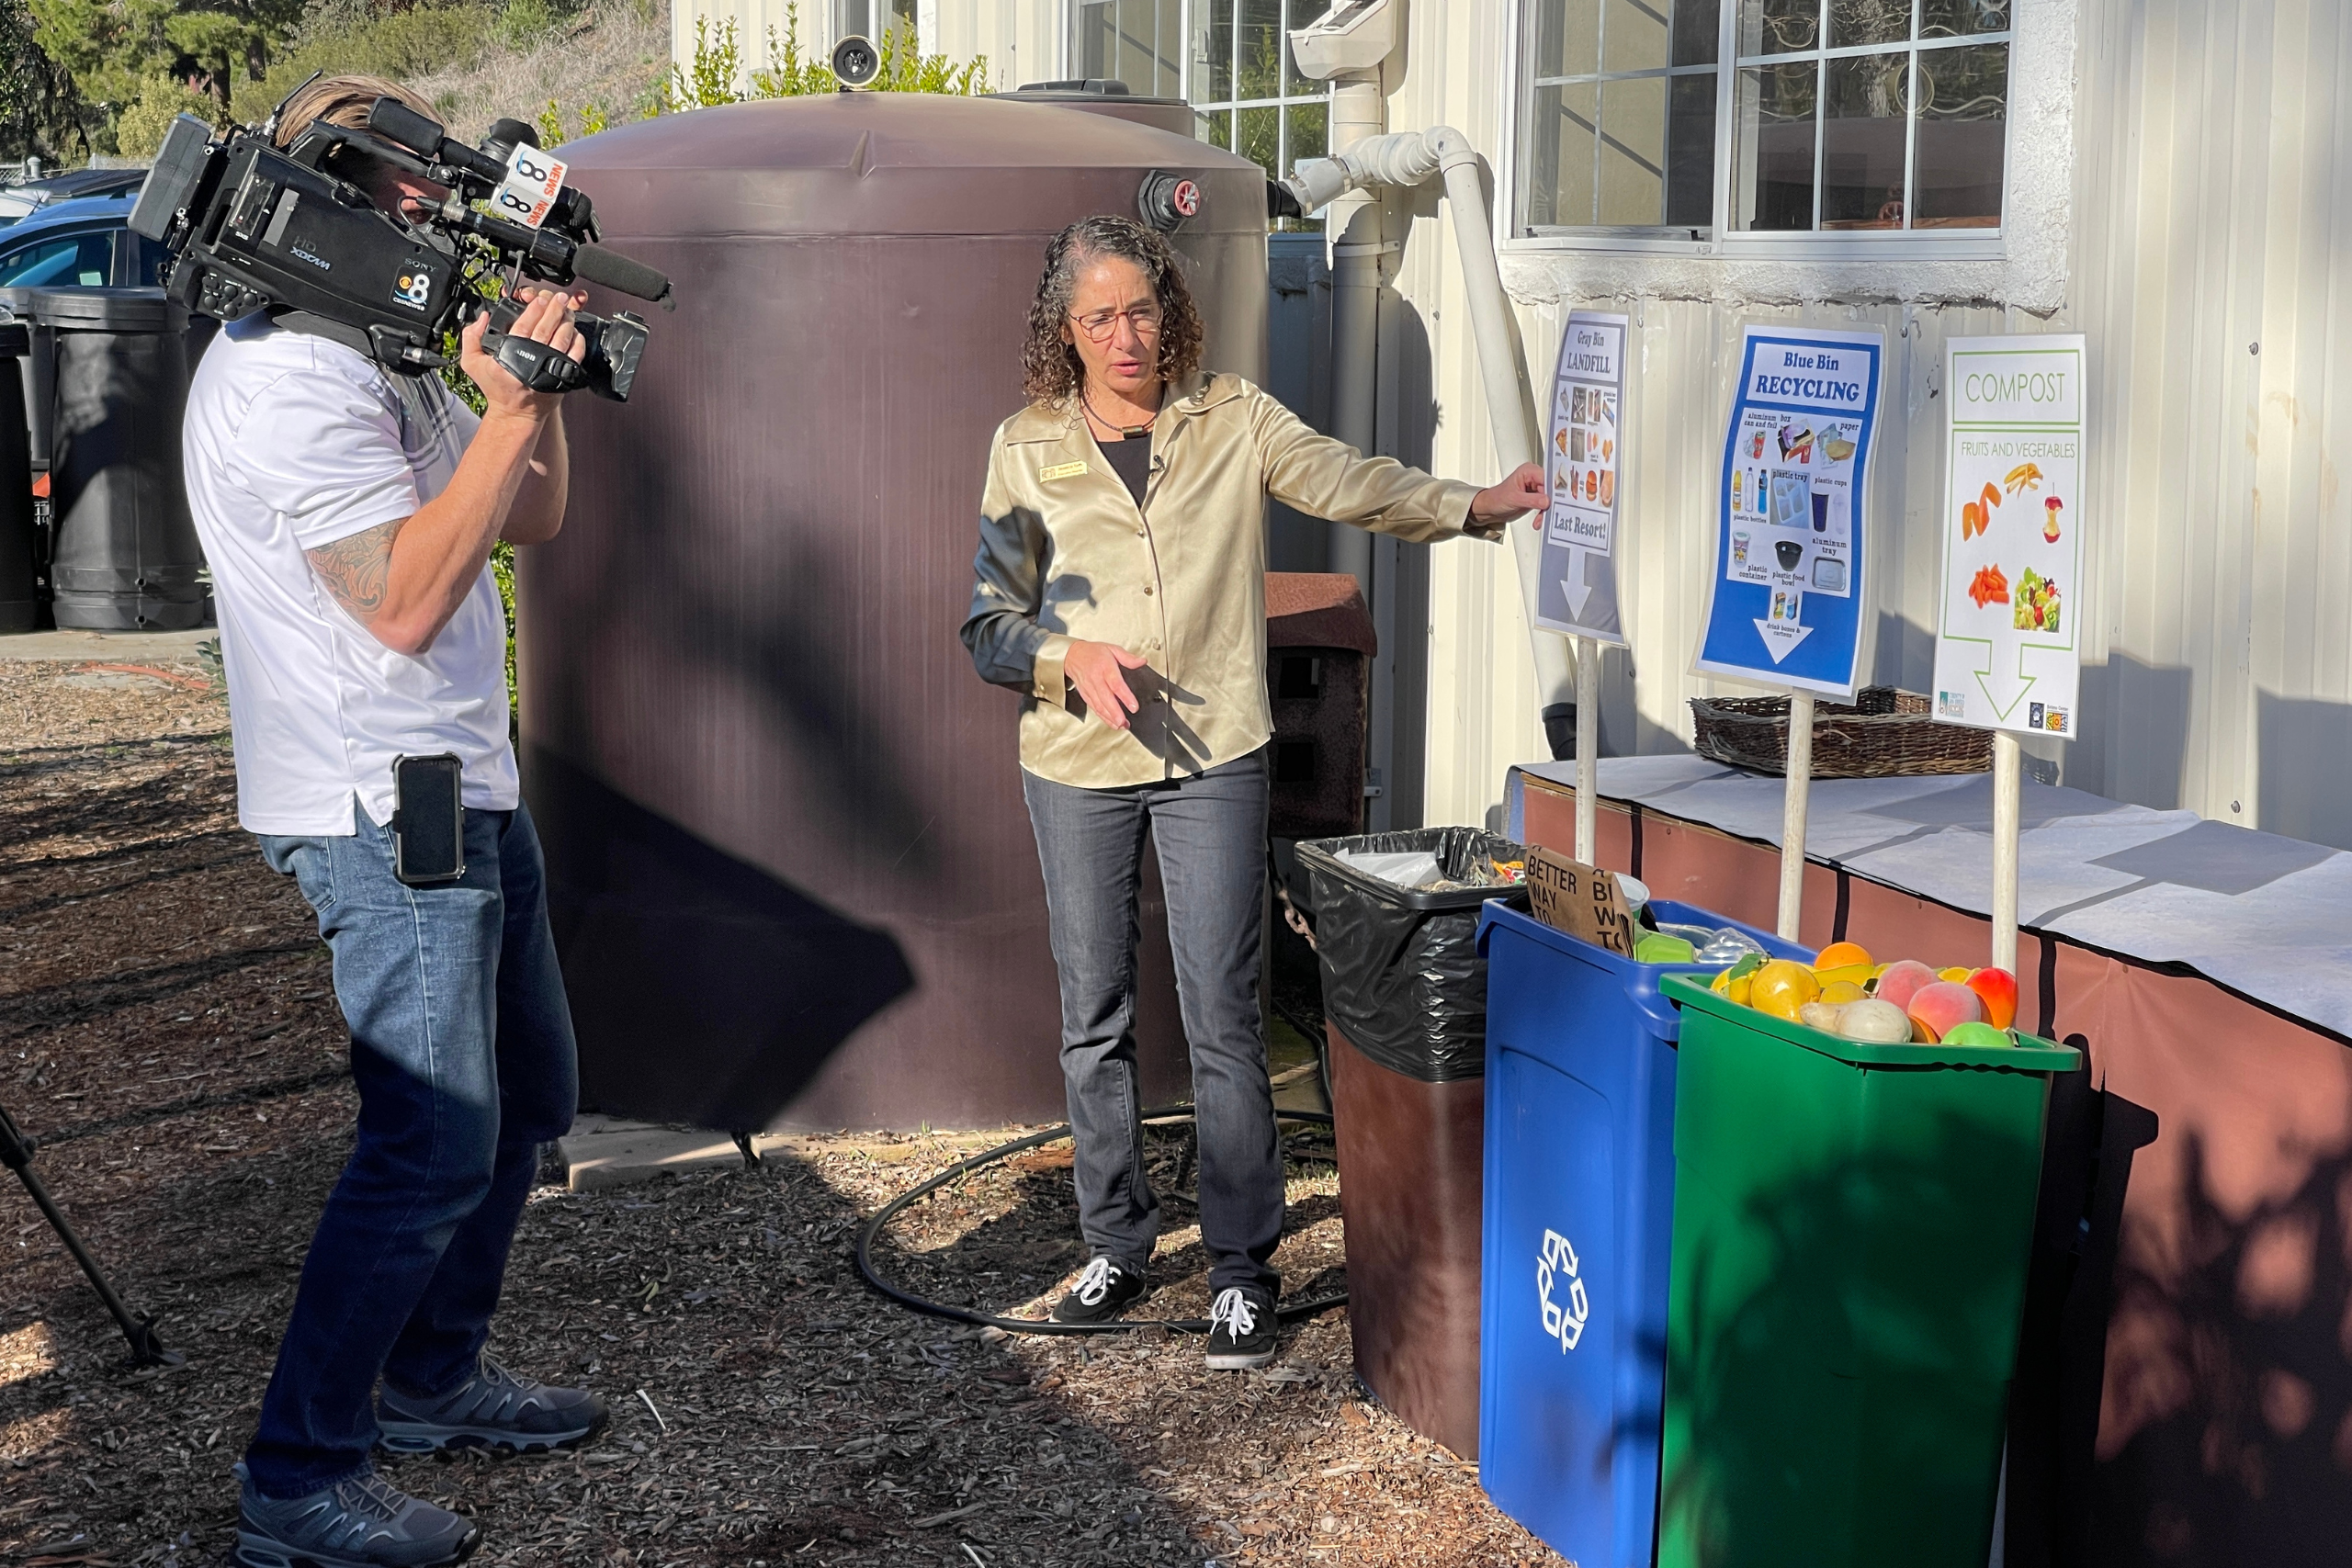 Jessica Toth, executive director at Solana Center for Environmental Innovation being interviewed by CBS 8 reporter Brian White on SB 1383 during media day at the center.